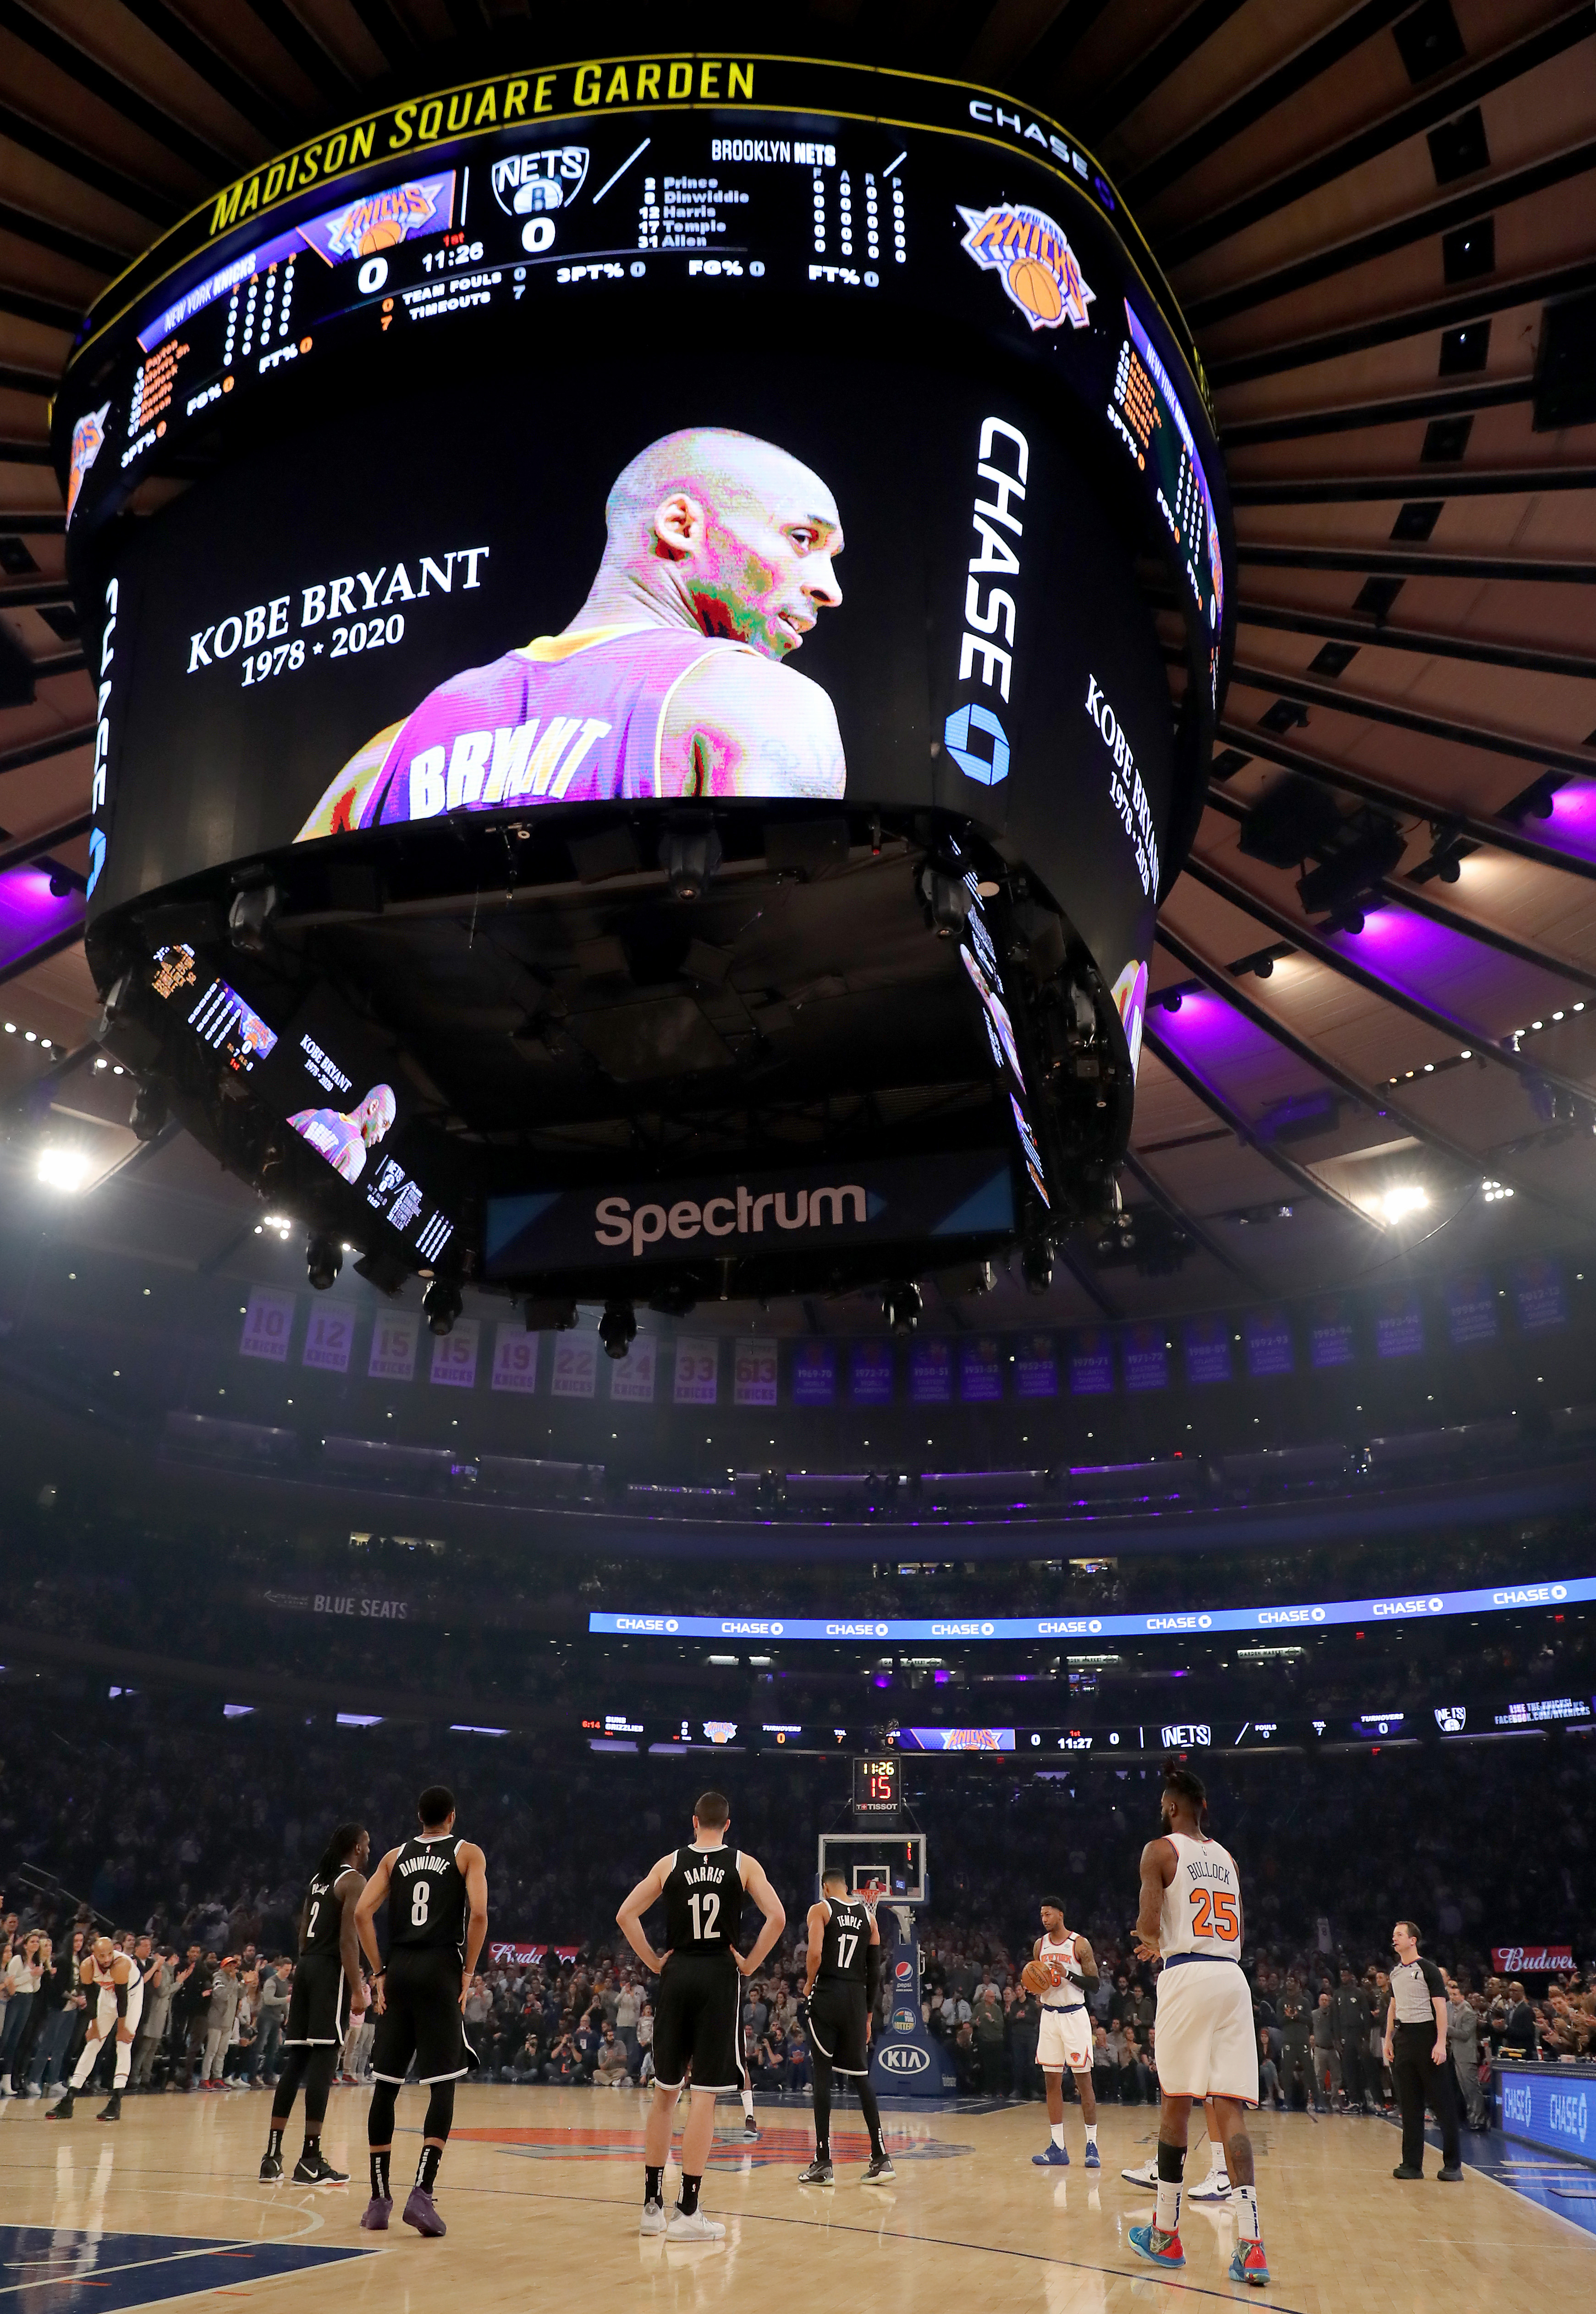 The New York Knicks and the Brooklyn Nets honour Kobe Bryant at Madison Square Garden, in New York City.